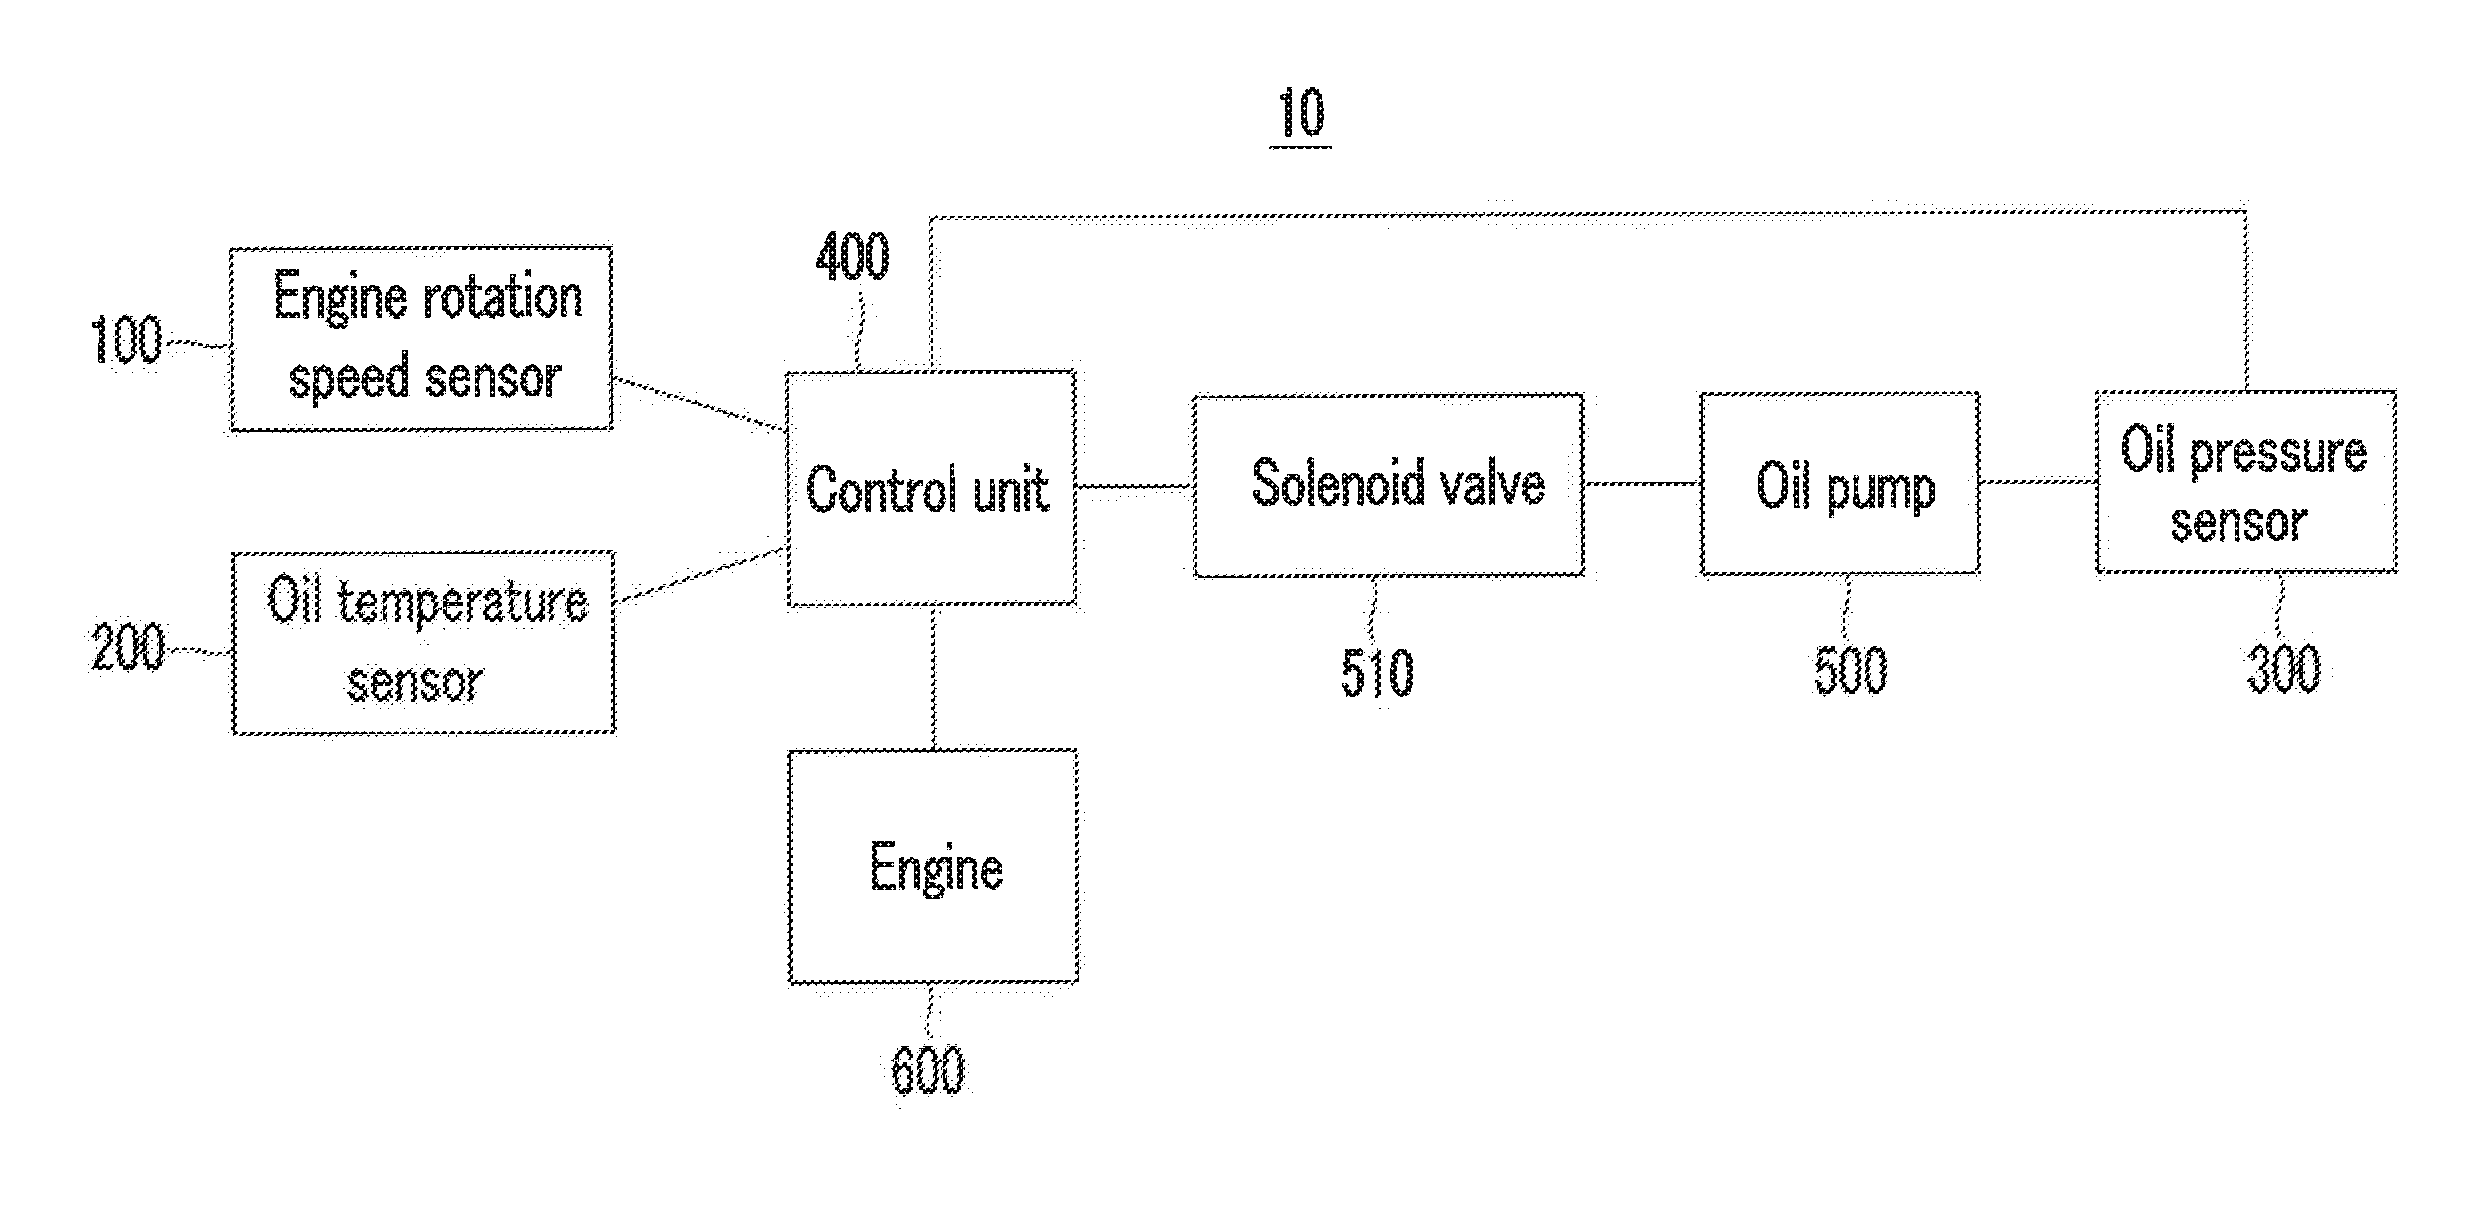 System and method for controlling oil pump